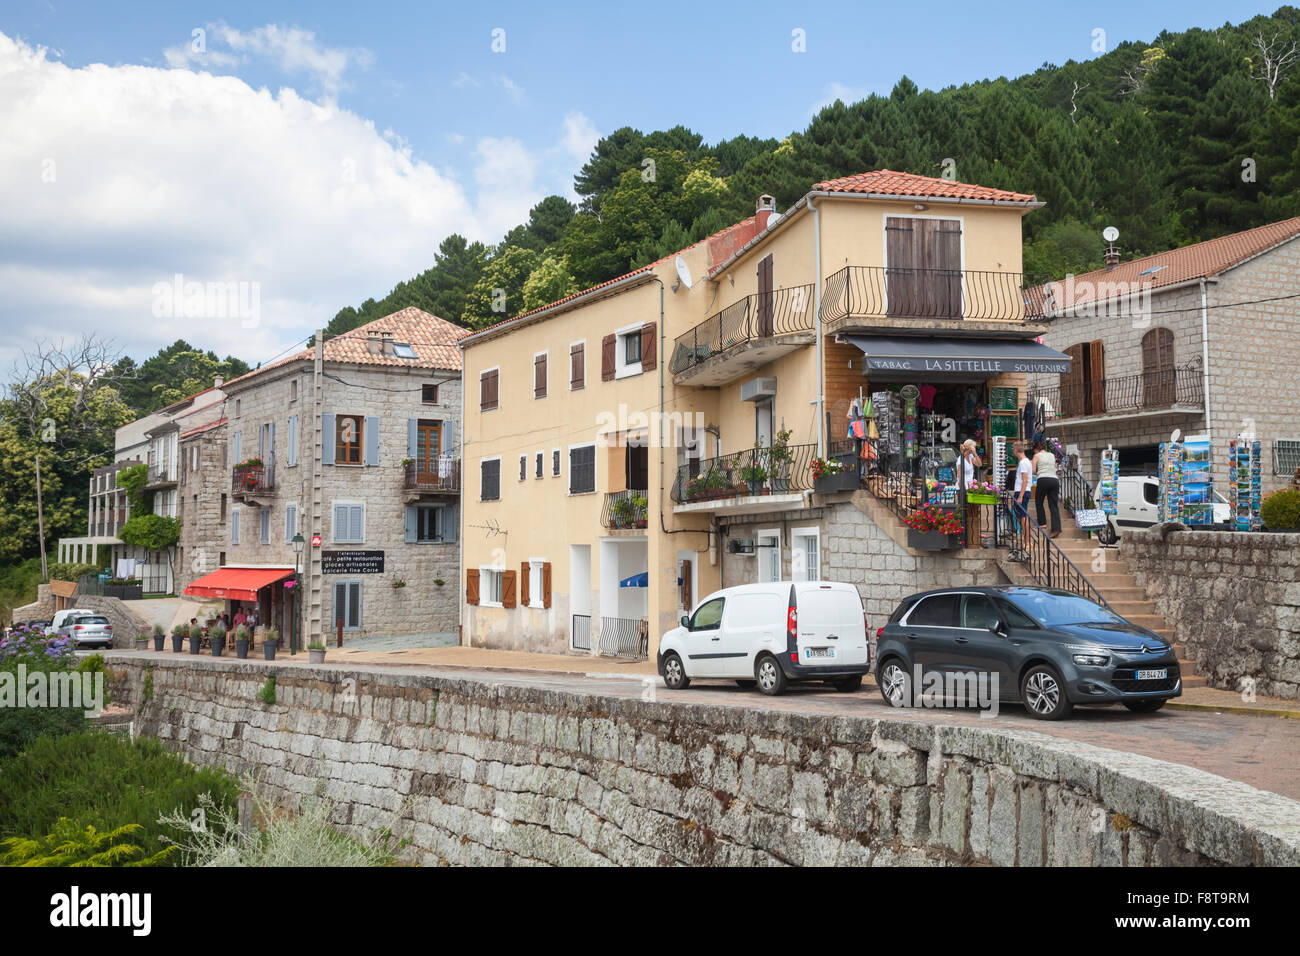 Zonza, France - July 1, 2015: Corsican village street view, old stone houses along the road. Zonza, South Corsica Stock Photo